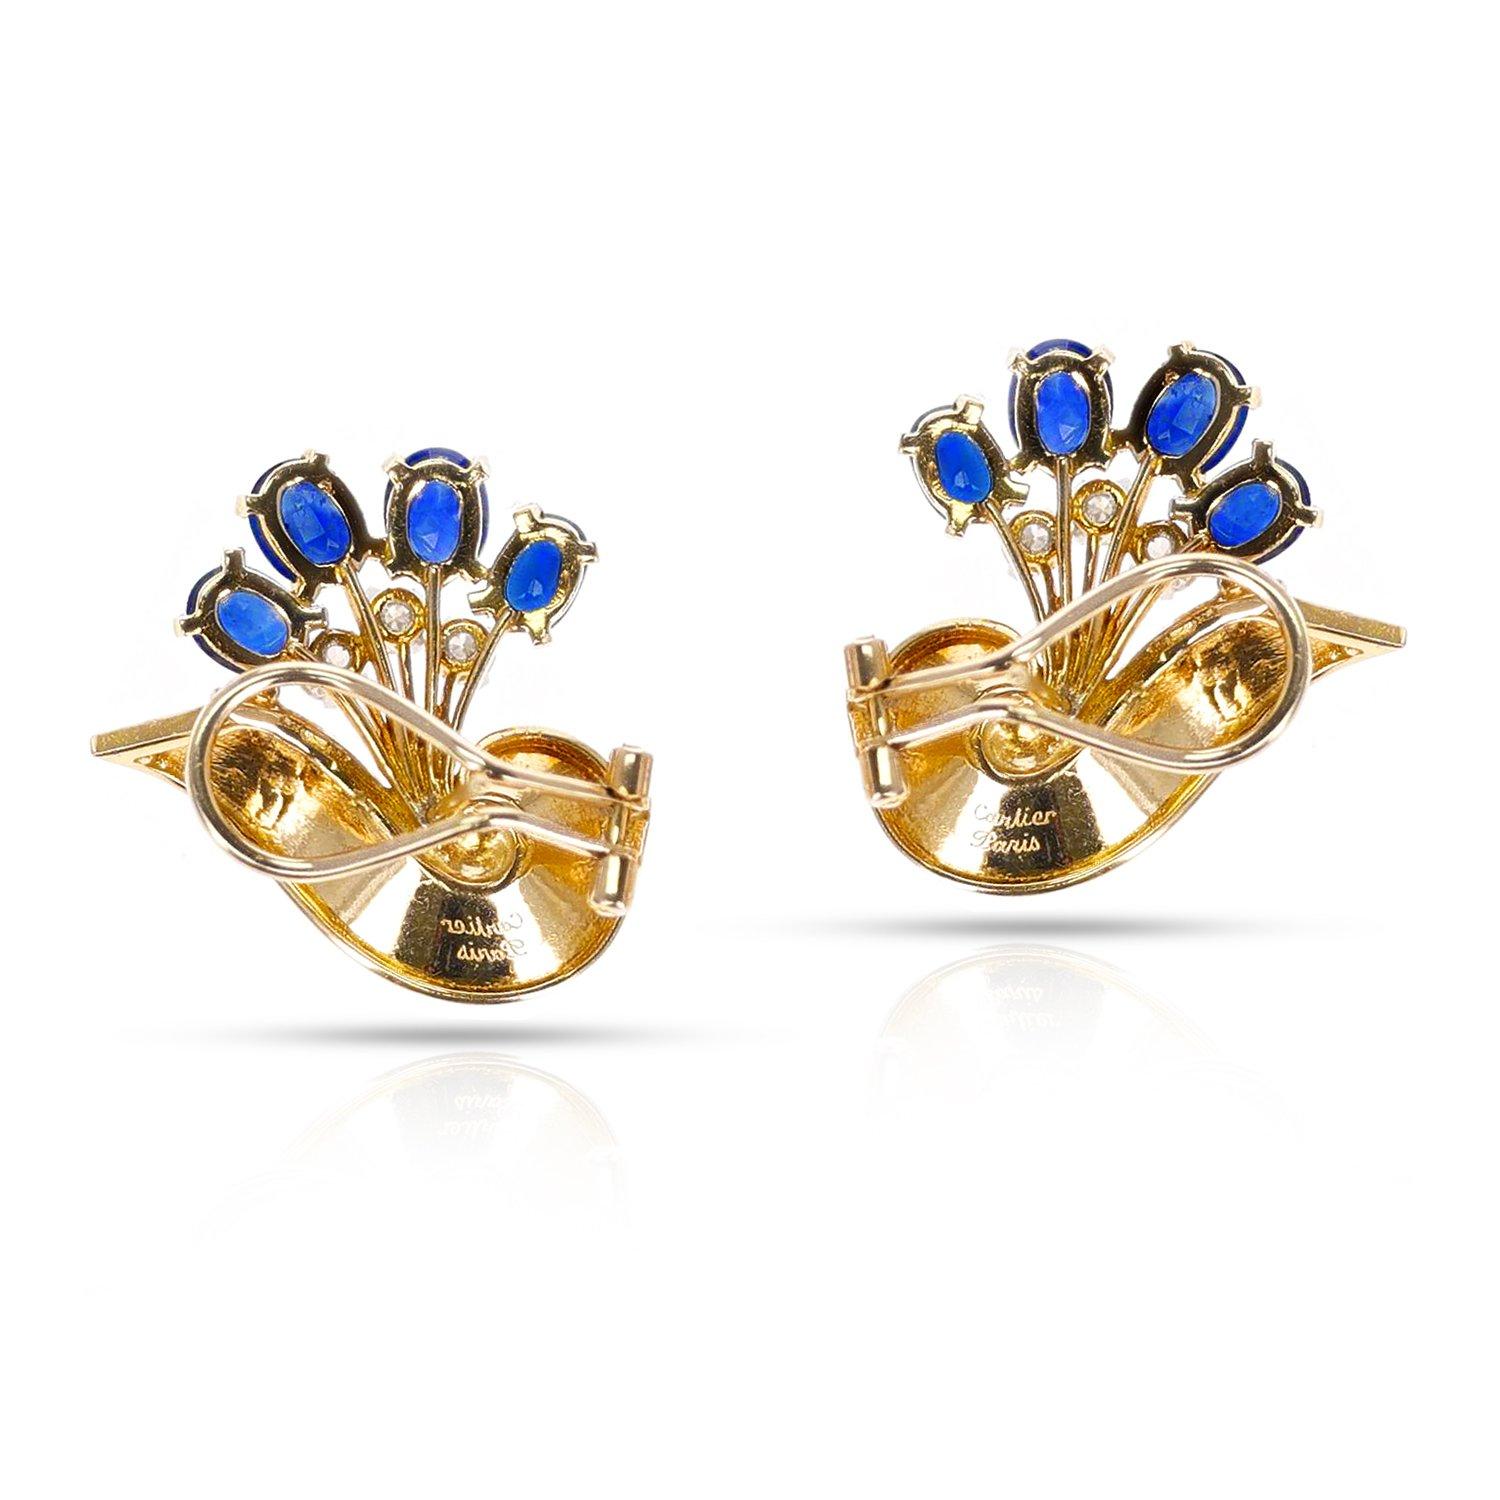 An elegant pair of Sapphire and Diamond 18K Yellow Gold Earrings by Cartier, Paris. These exquisite vintage treasures, crafted in the heart of Paris, France, by skilled artisans, bear the prestigious Cartier name that is synonymous with luxury and